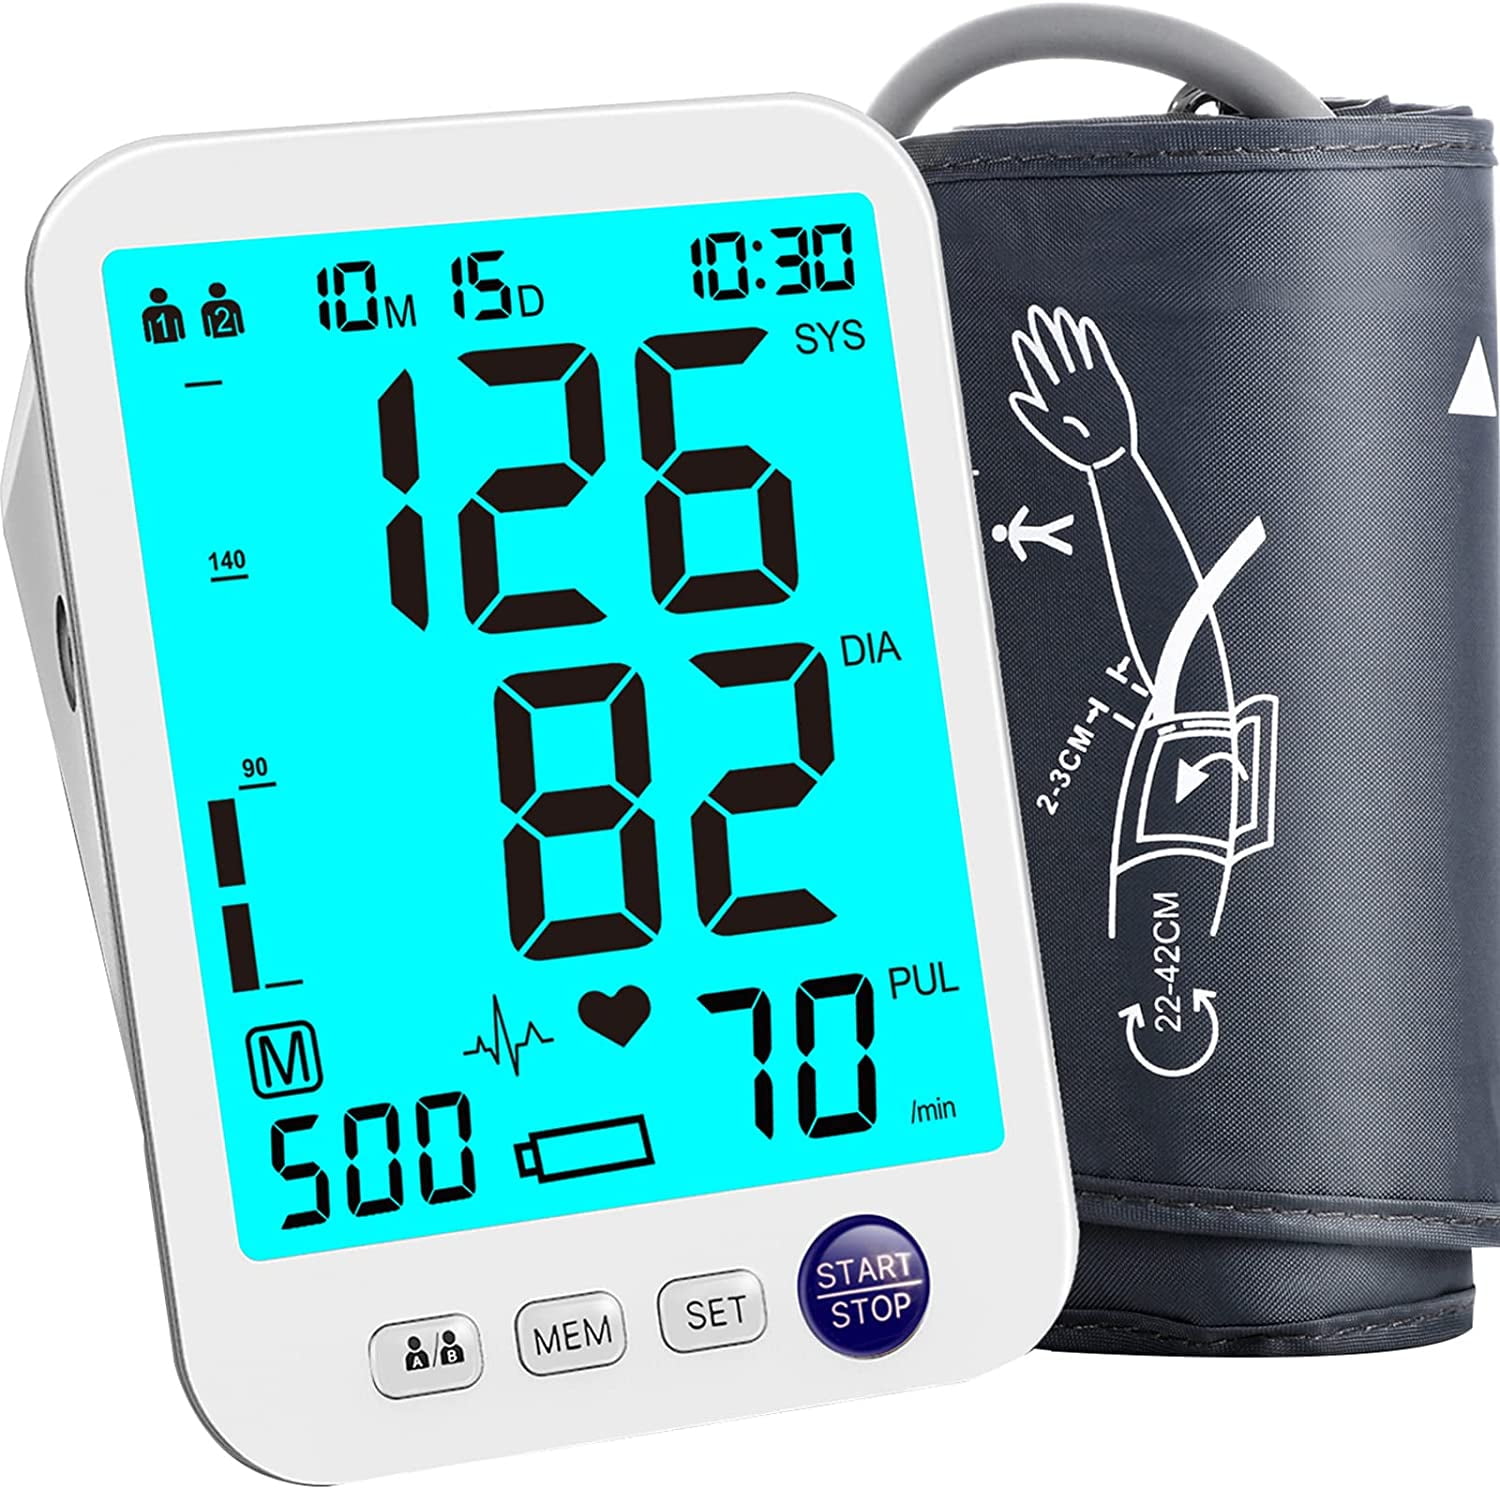 Paramed Blood Pressure Monitor - Bp Machine - Automatic Upper Arm Blood  Pressure Cuff 8.7-15.7 inches - Large LCD Display 120 Sets Memory - Device  Bag